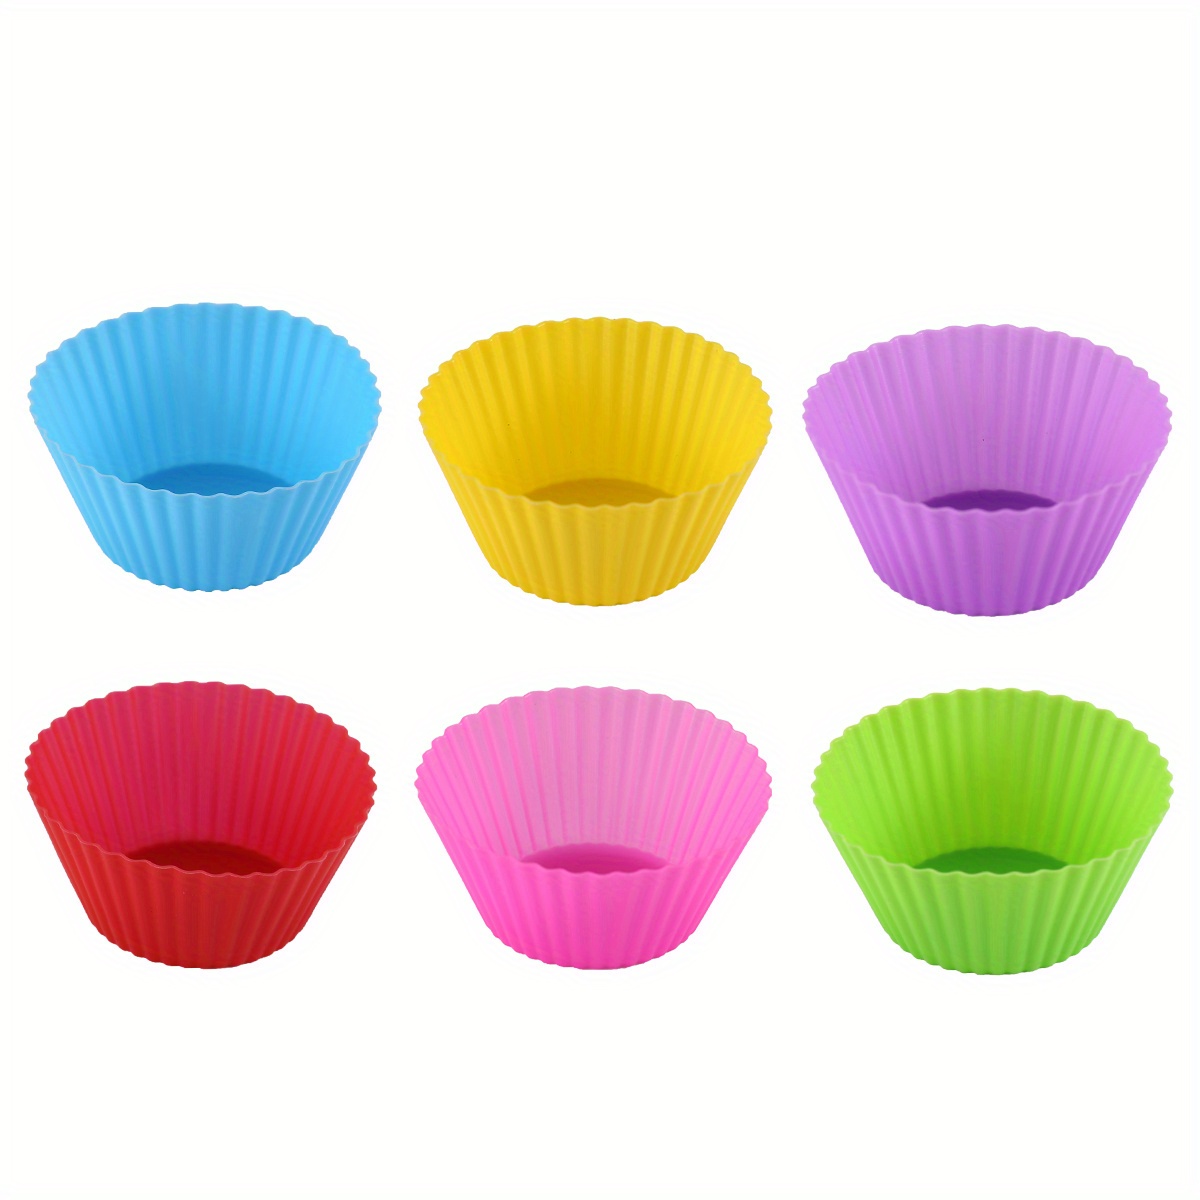 GoXteam Silicone Cupcake Liners Reusable Baking Cups Nonstick Easy